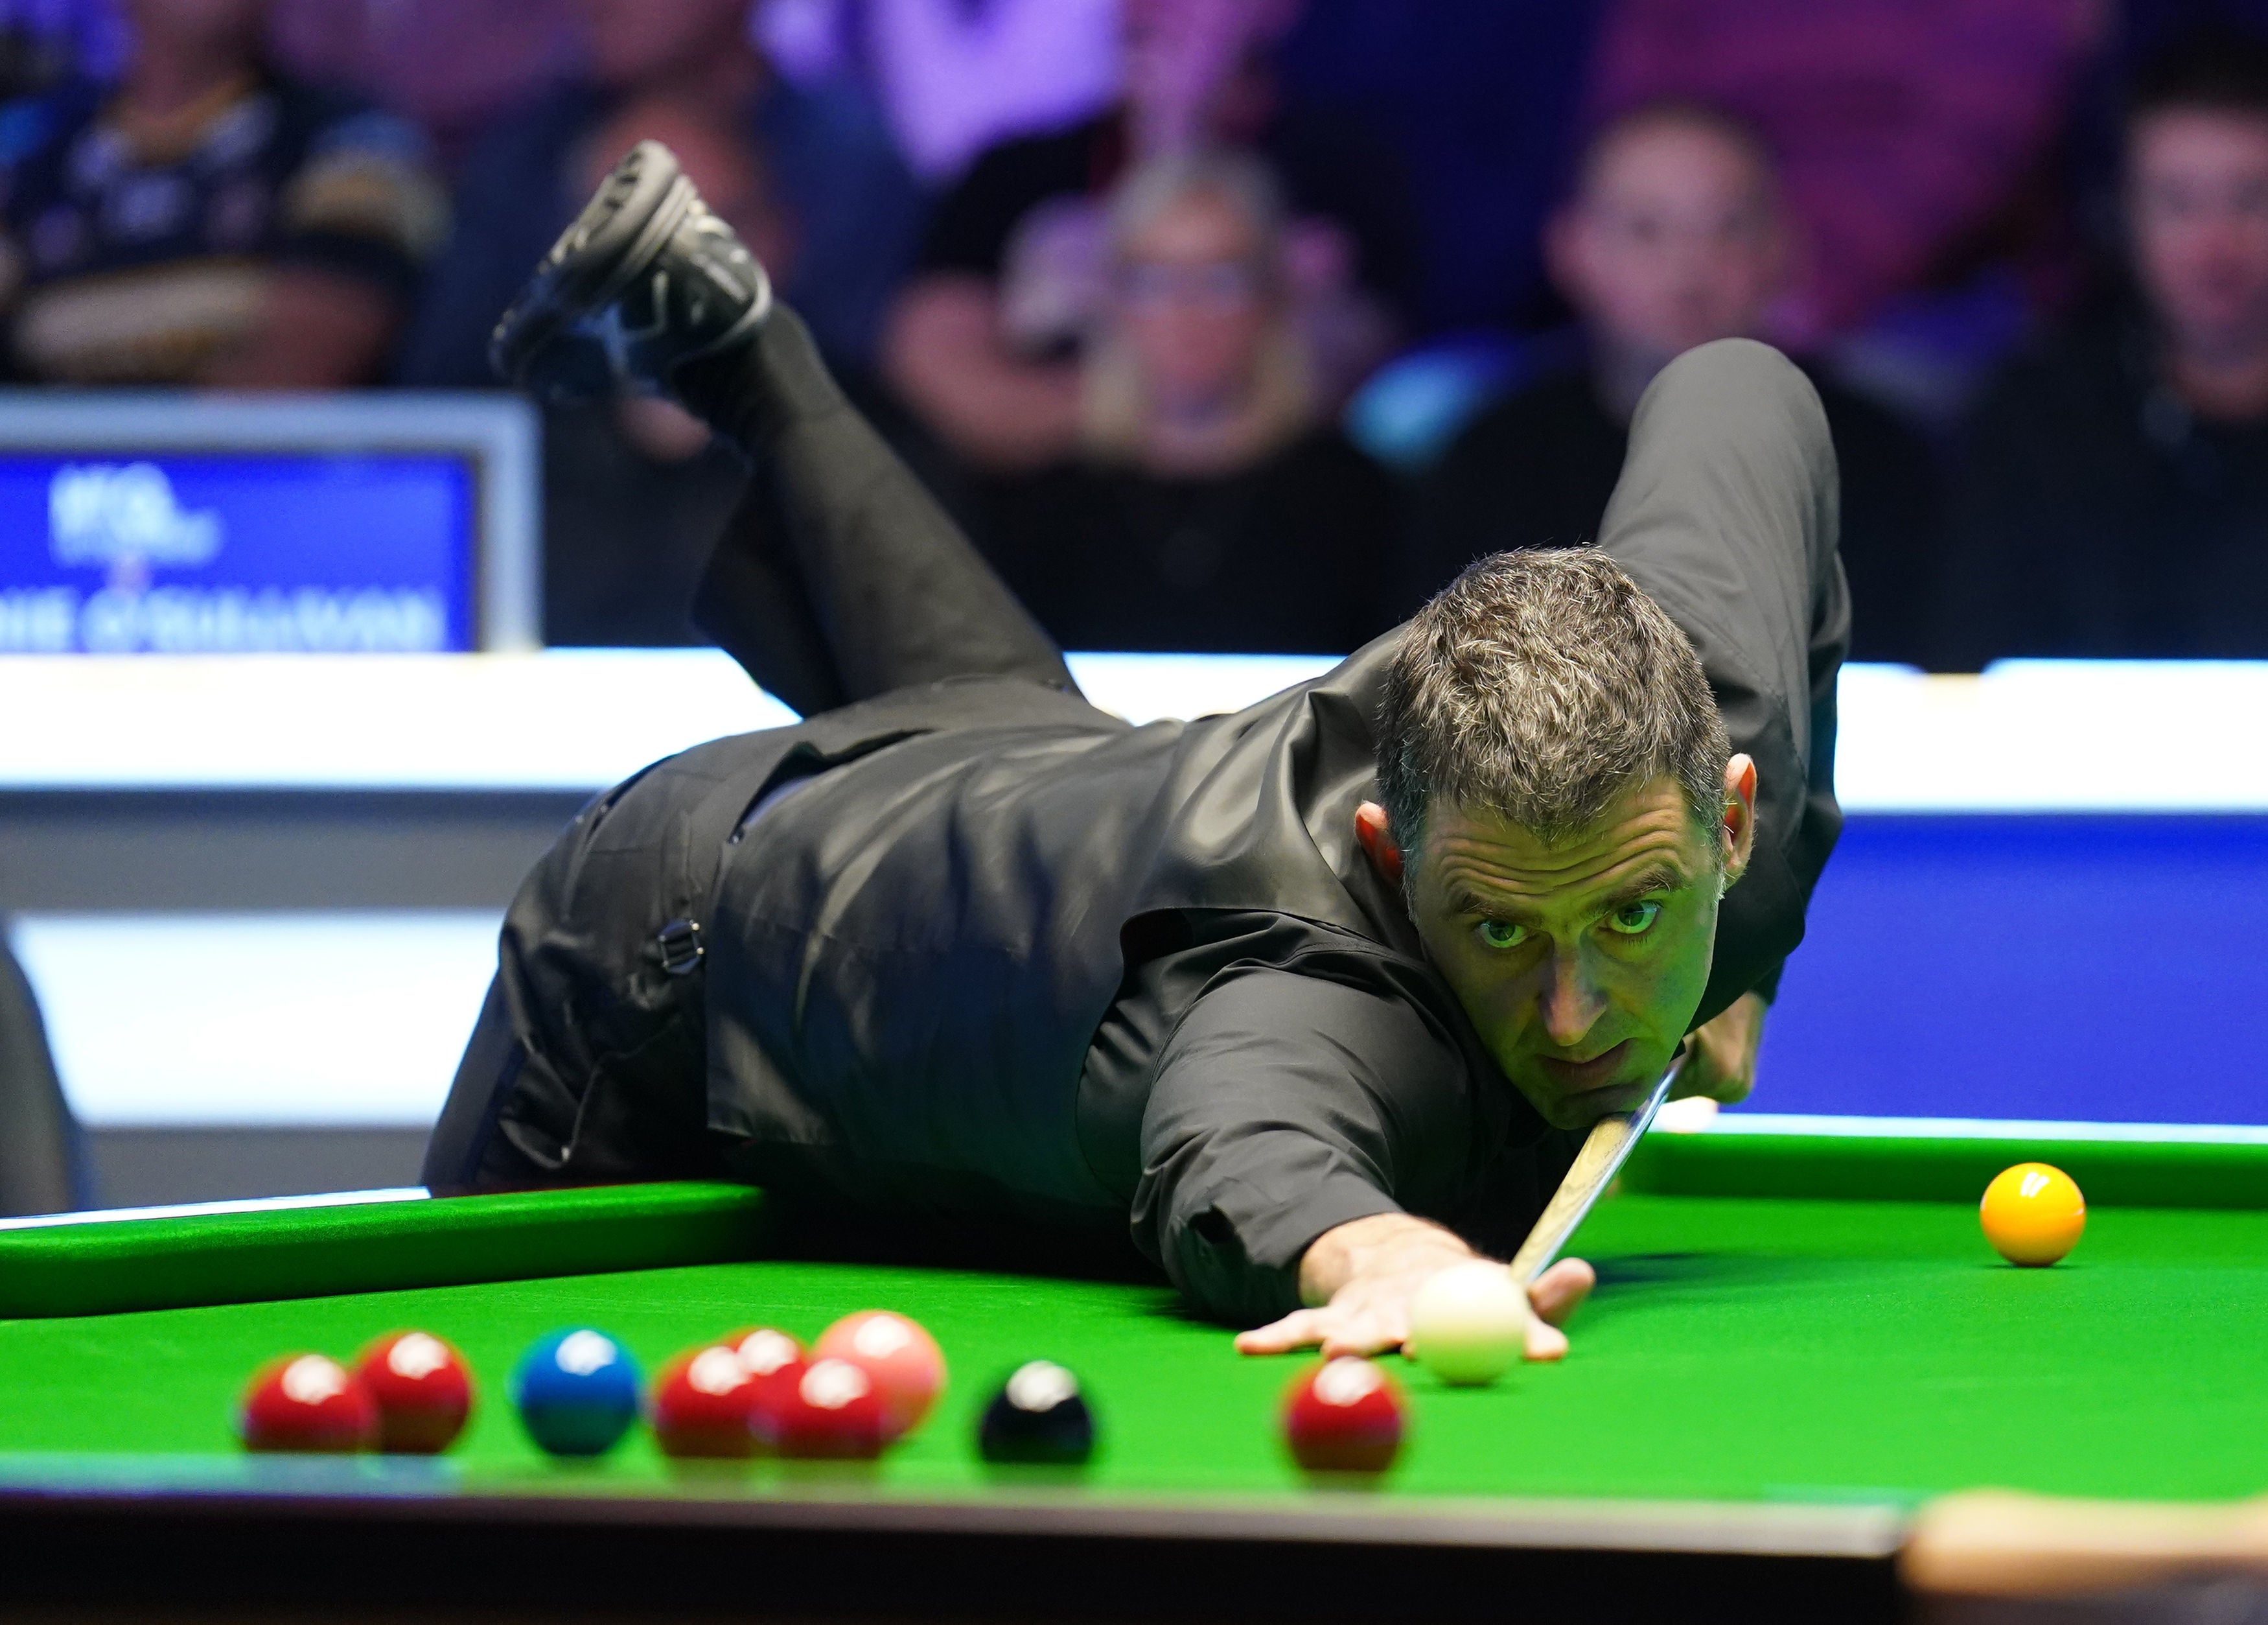 After a shaky start, O’Sullivan reeled off six straight frames to go through